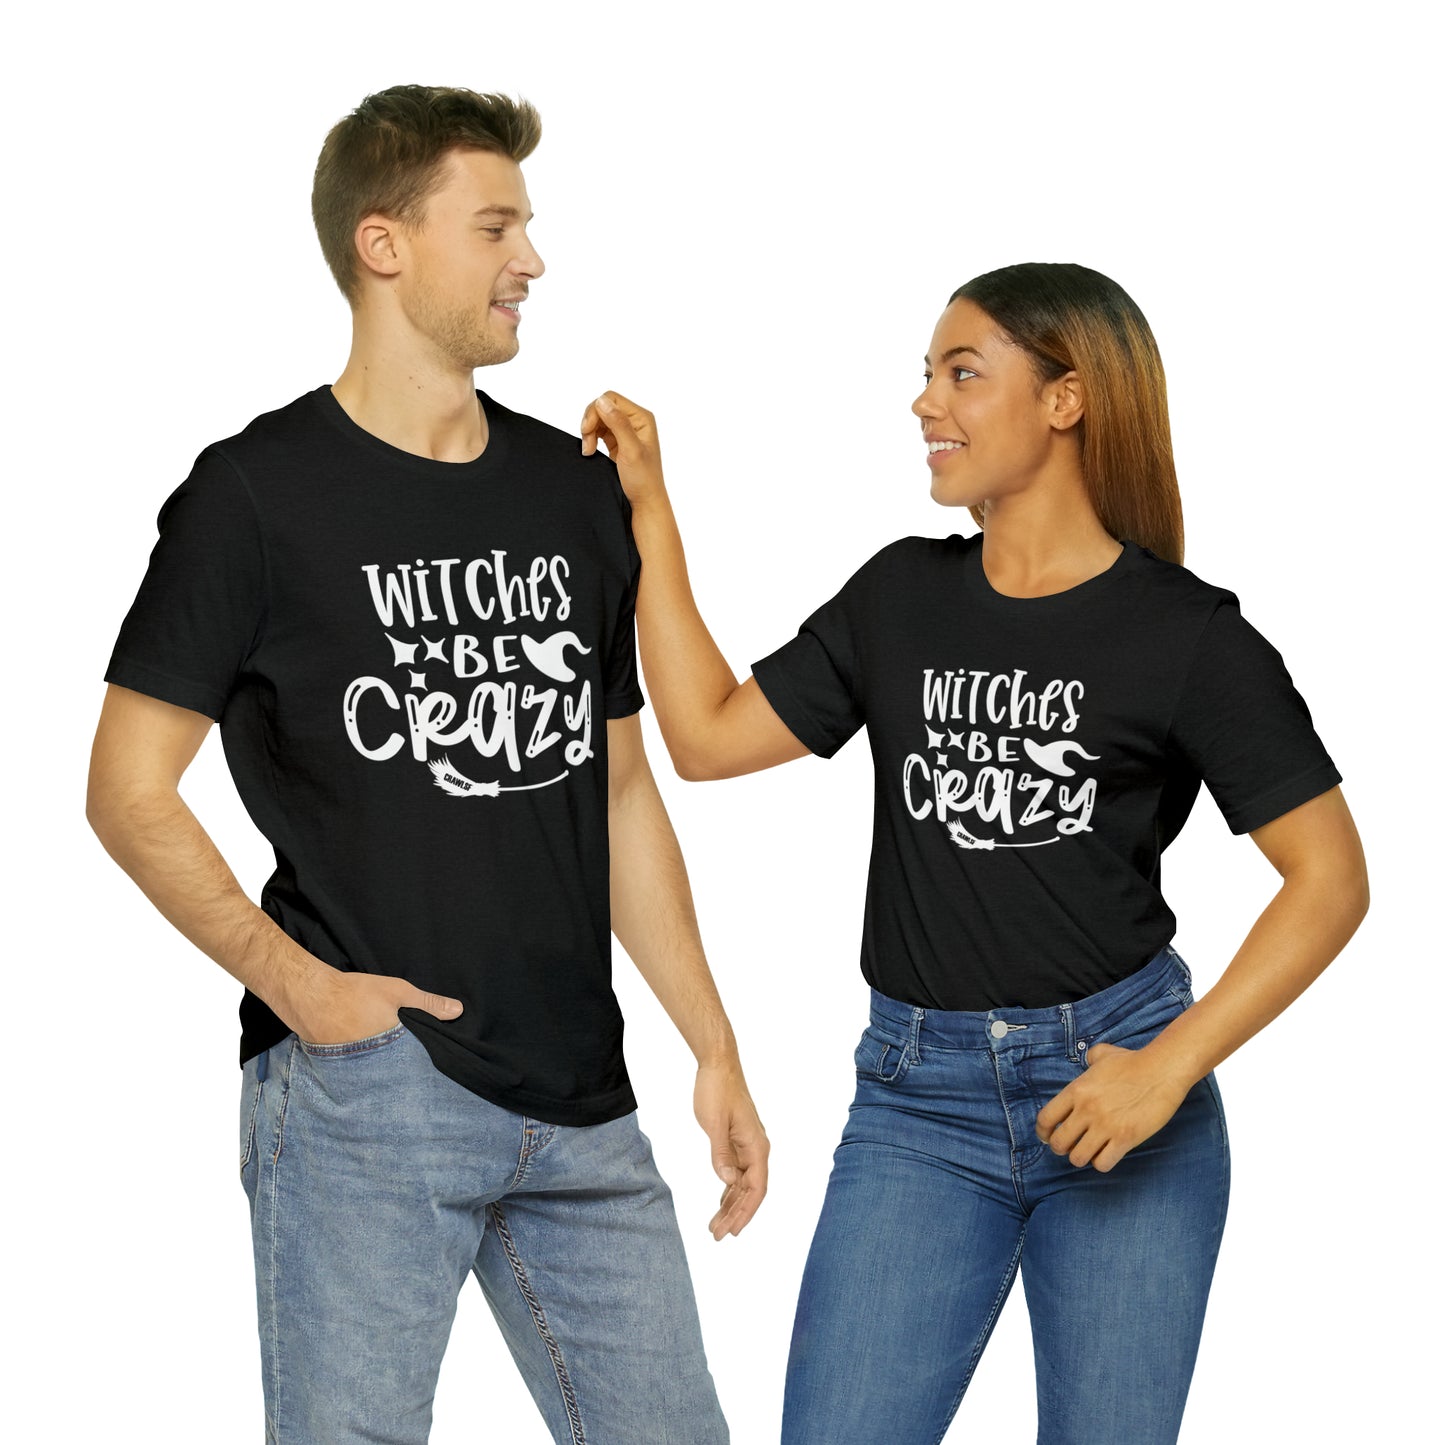 Witches Be Crazy Halloween Tee